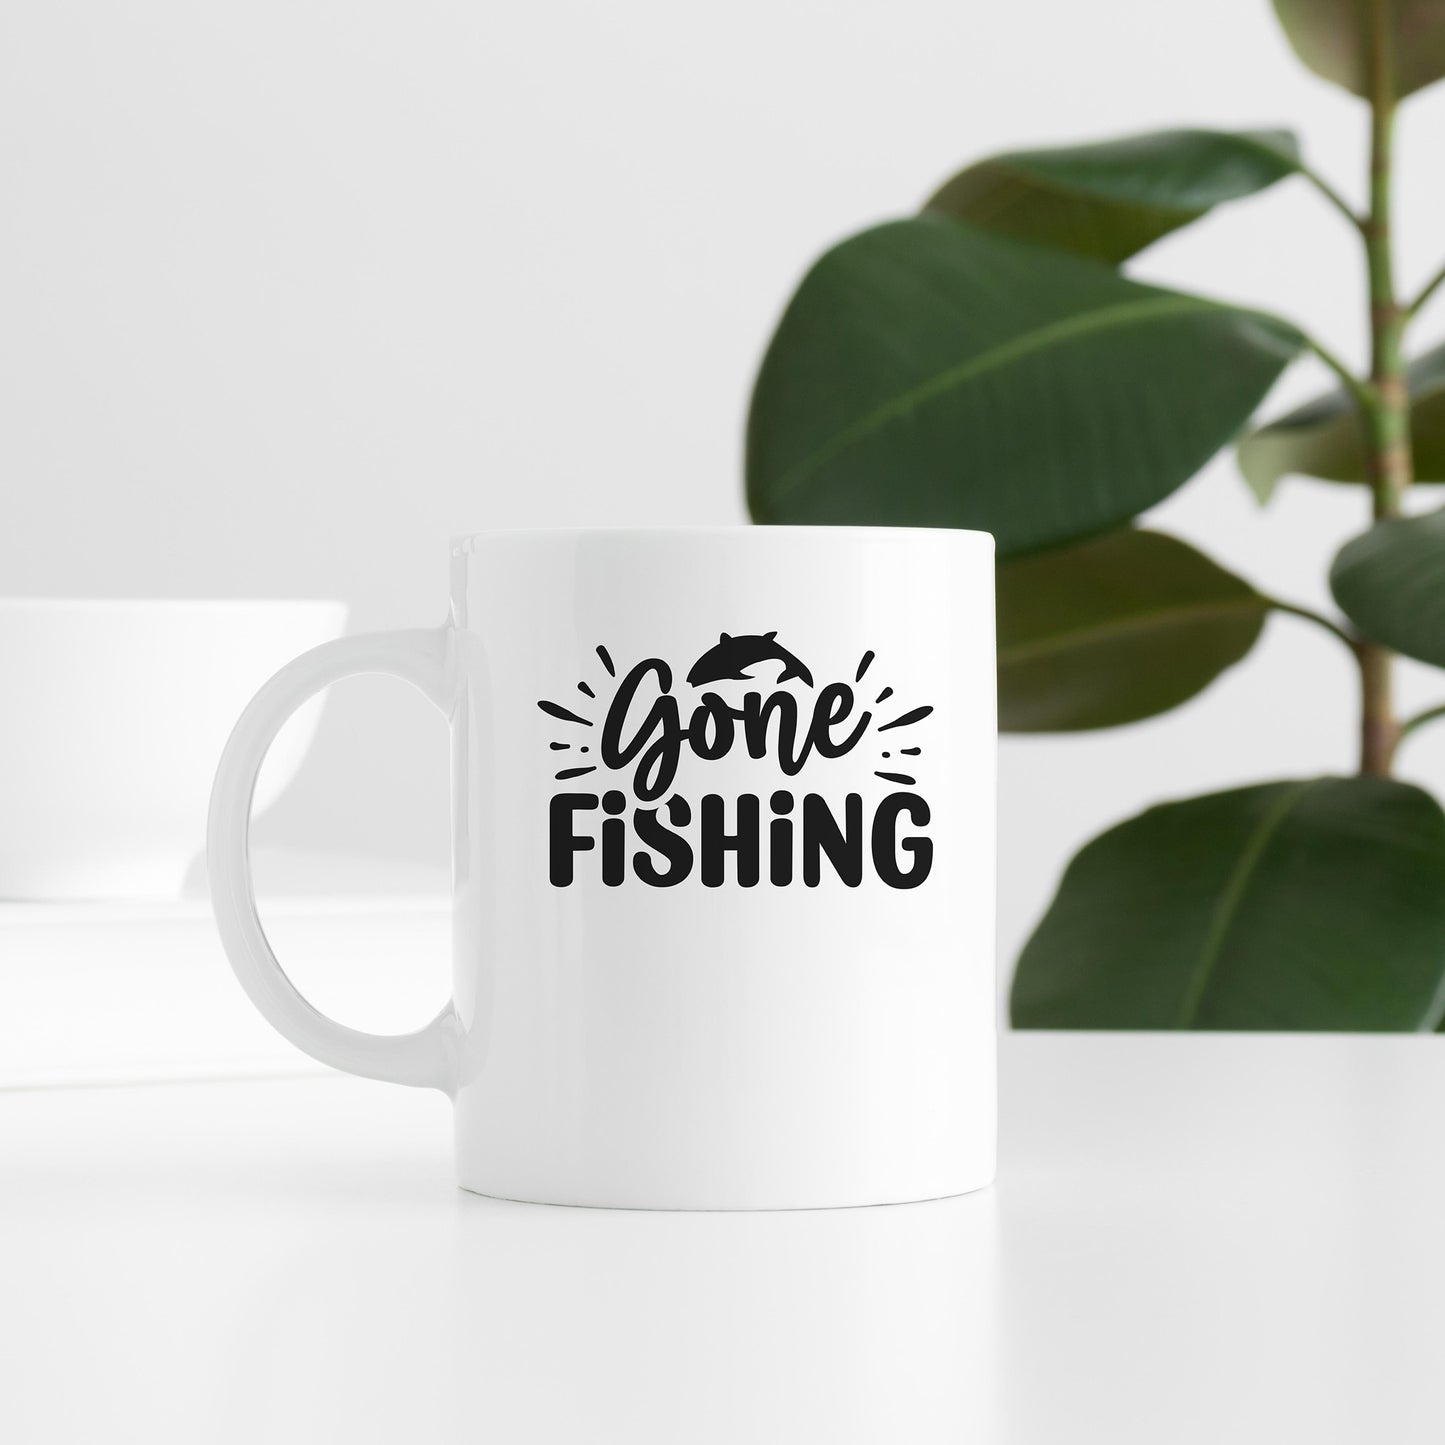 "Gone Fishing" Graphic